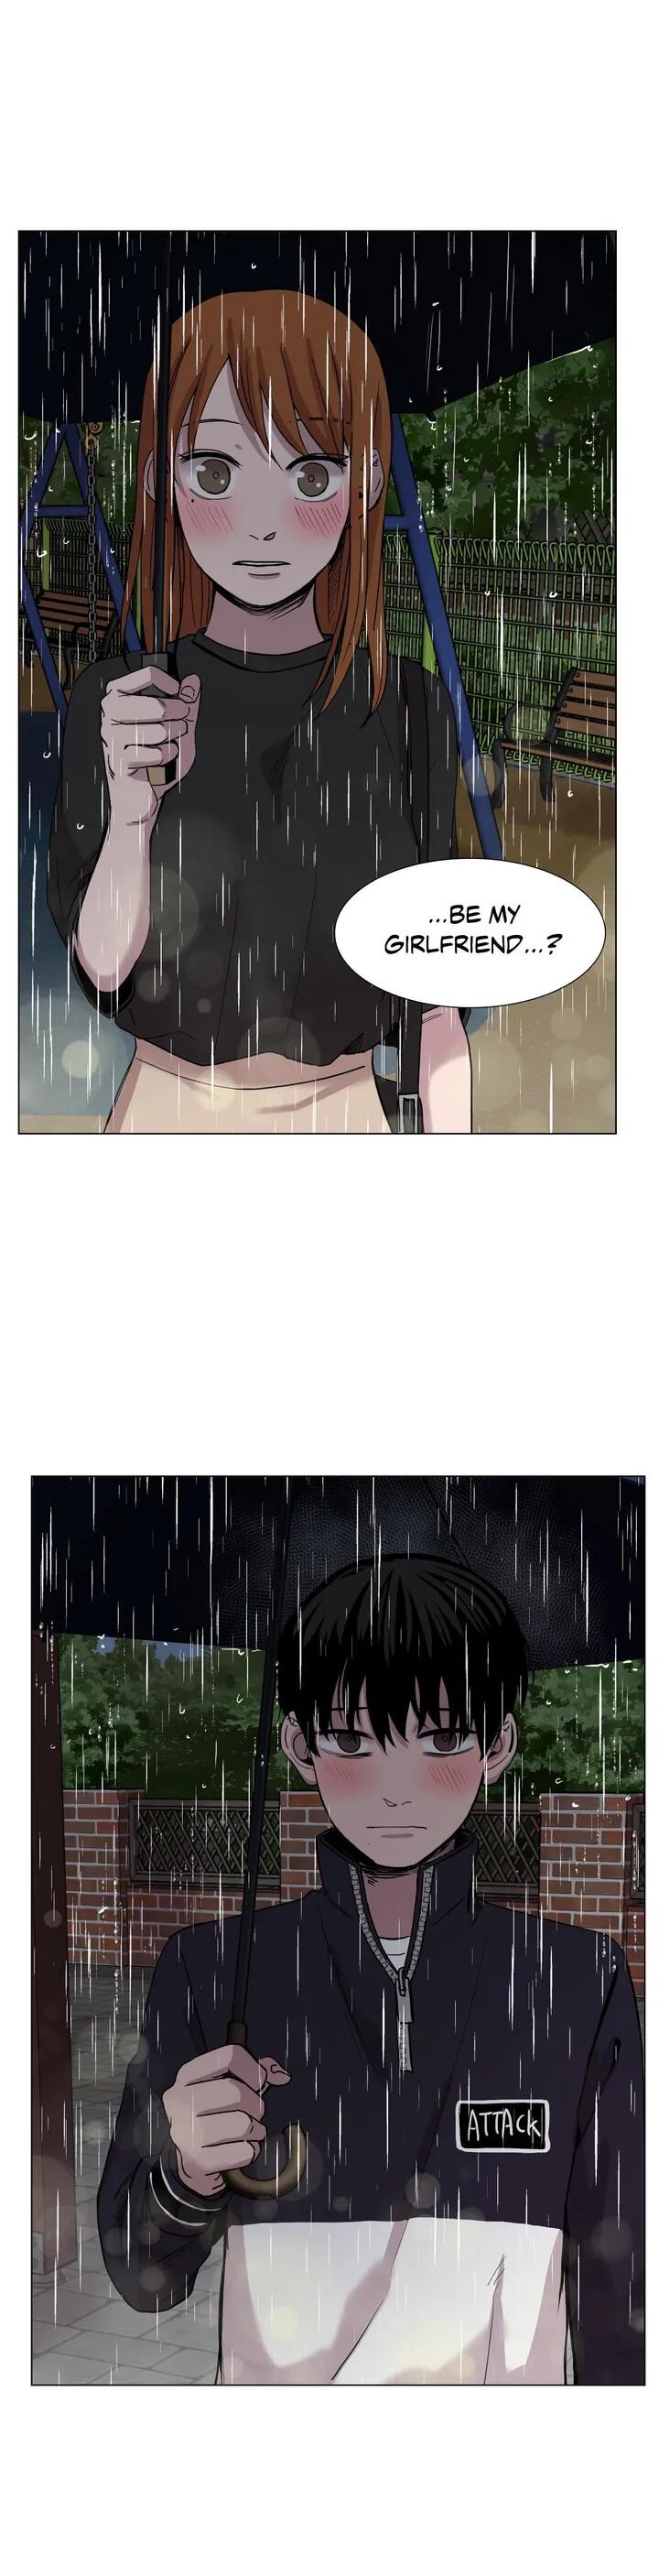 Their Circumstances (Sria) - Page 2